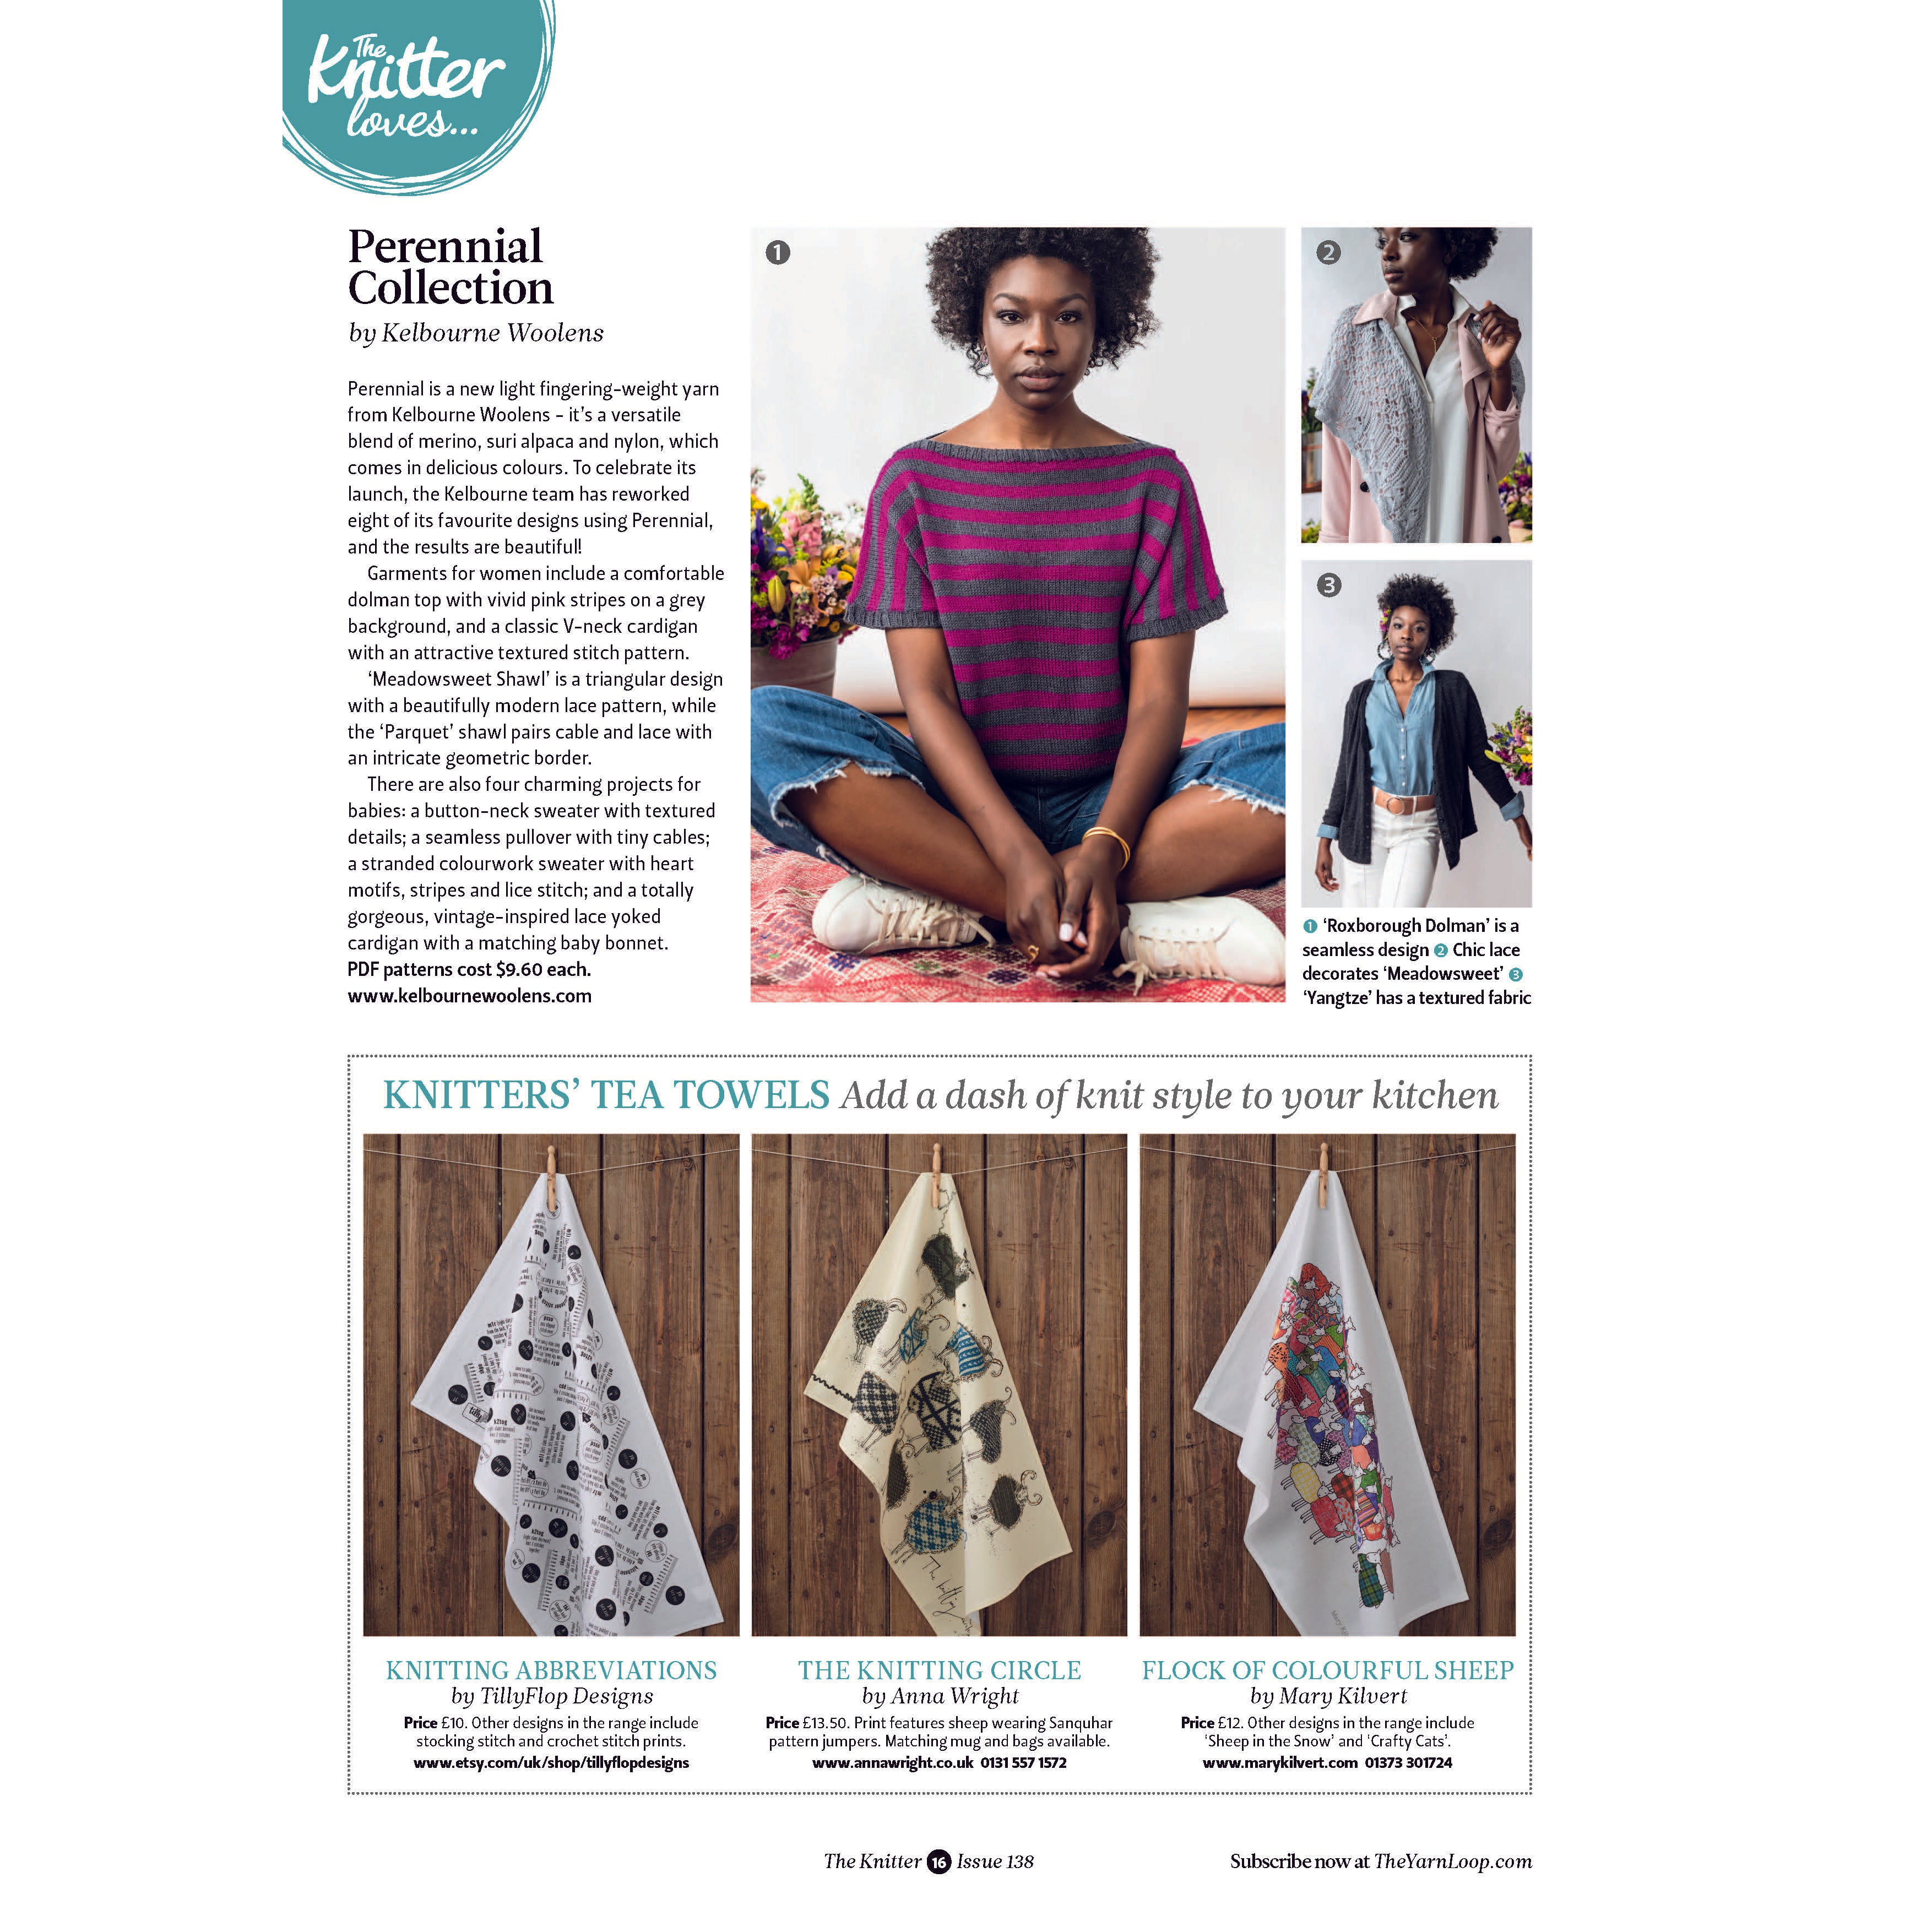 Mary Kilvert's Flock of Colourful Sheep Tea Towel in The Knitter magazine